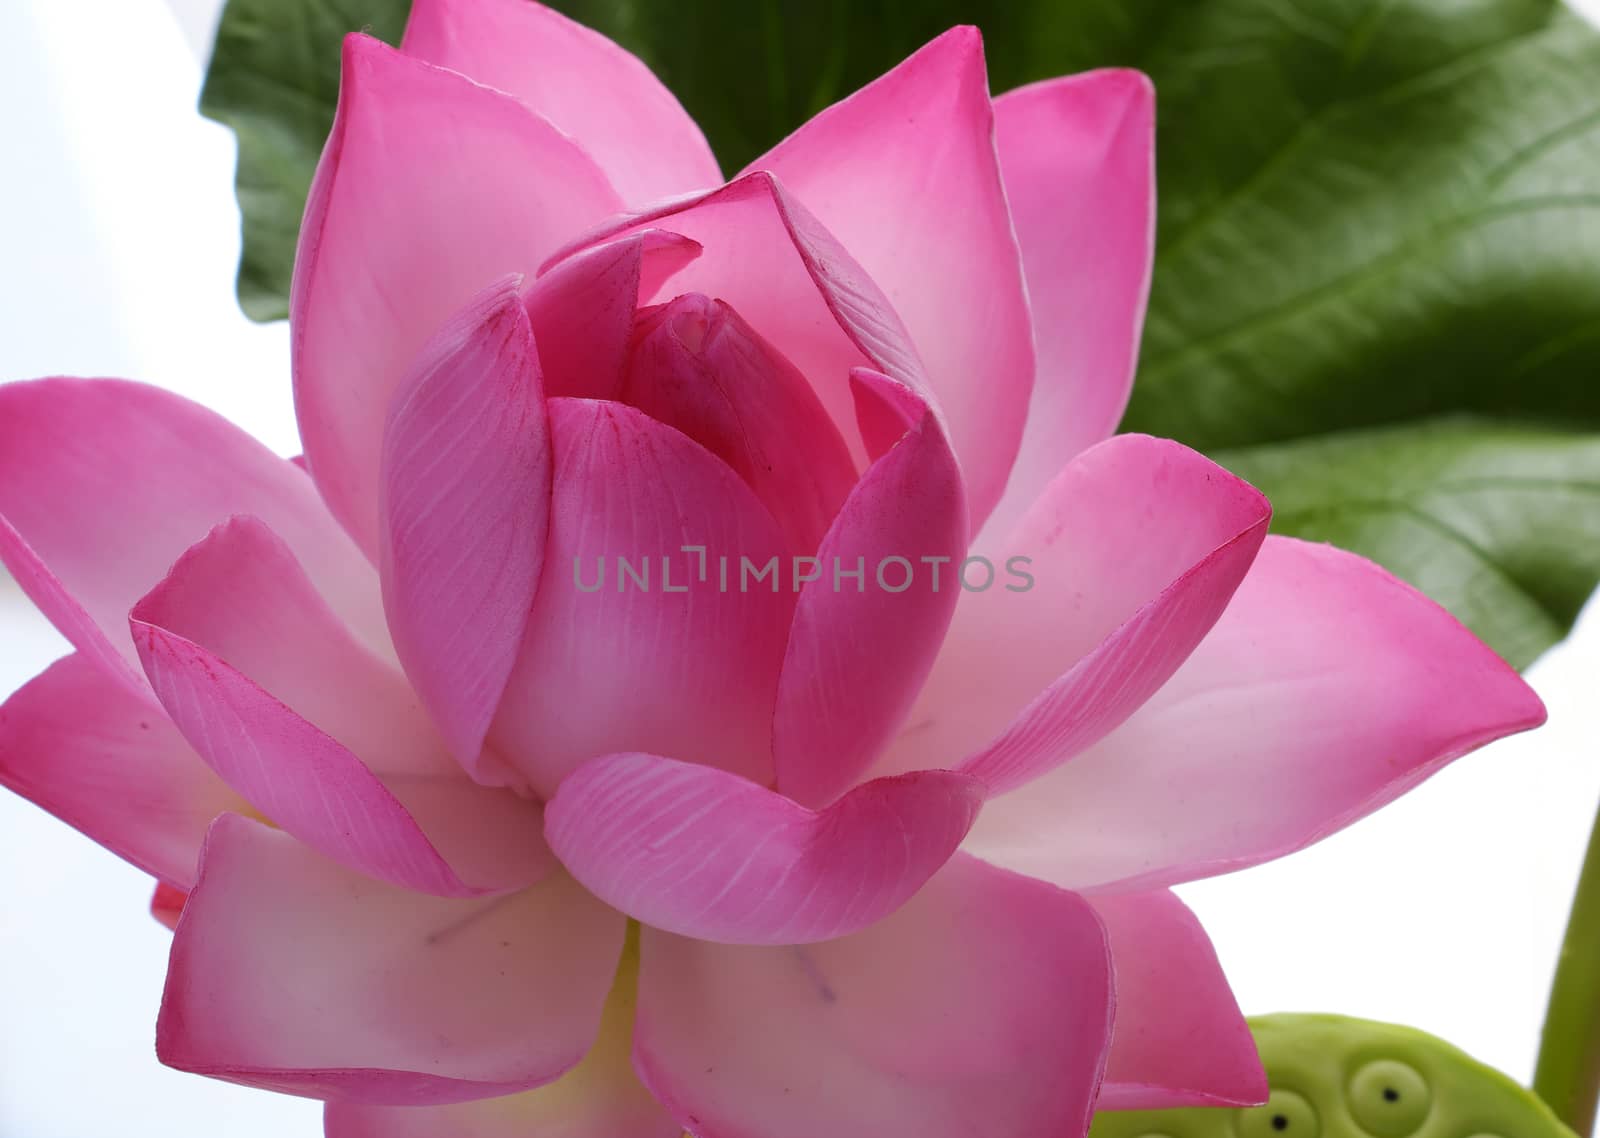 Artificial flower, handmade clay lotus flower with green leaf and pink petal, diy art product for home decoration, close up artwork on white background